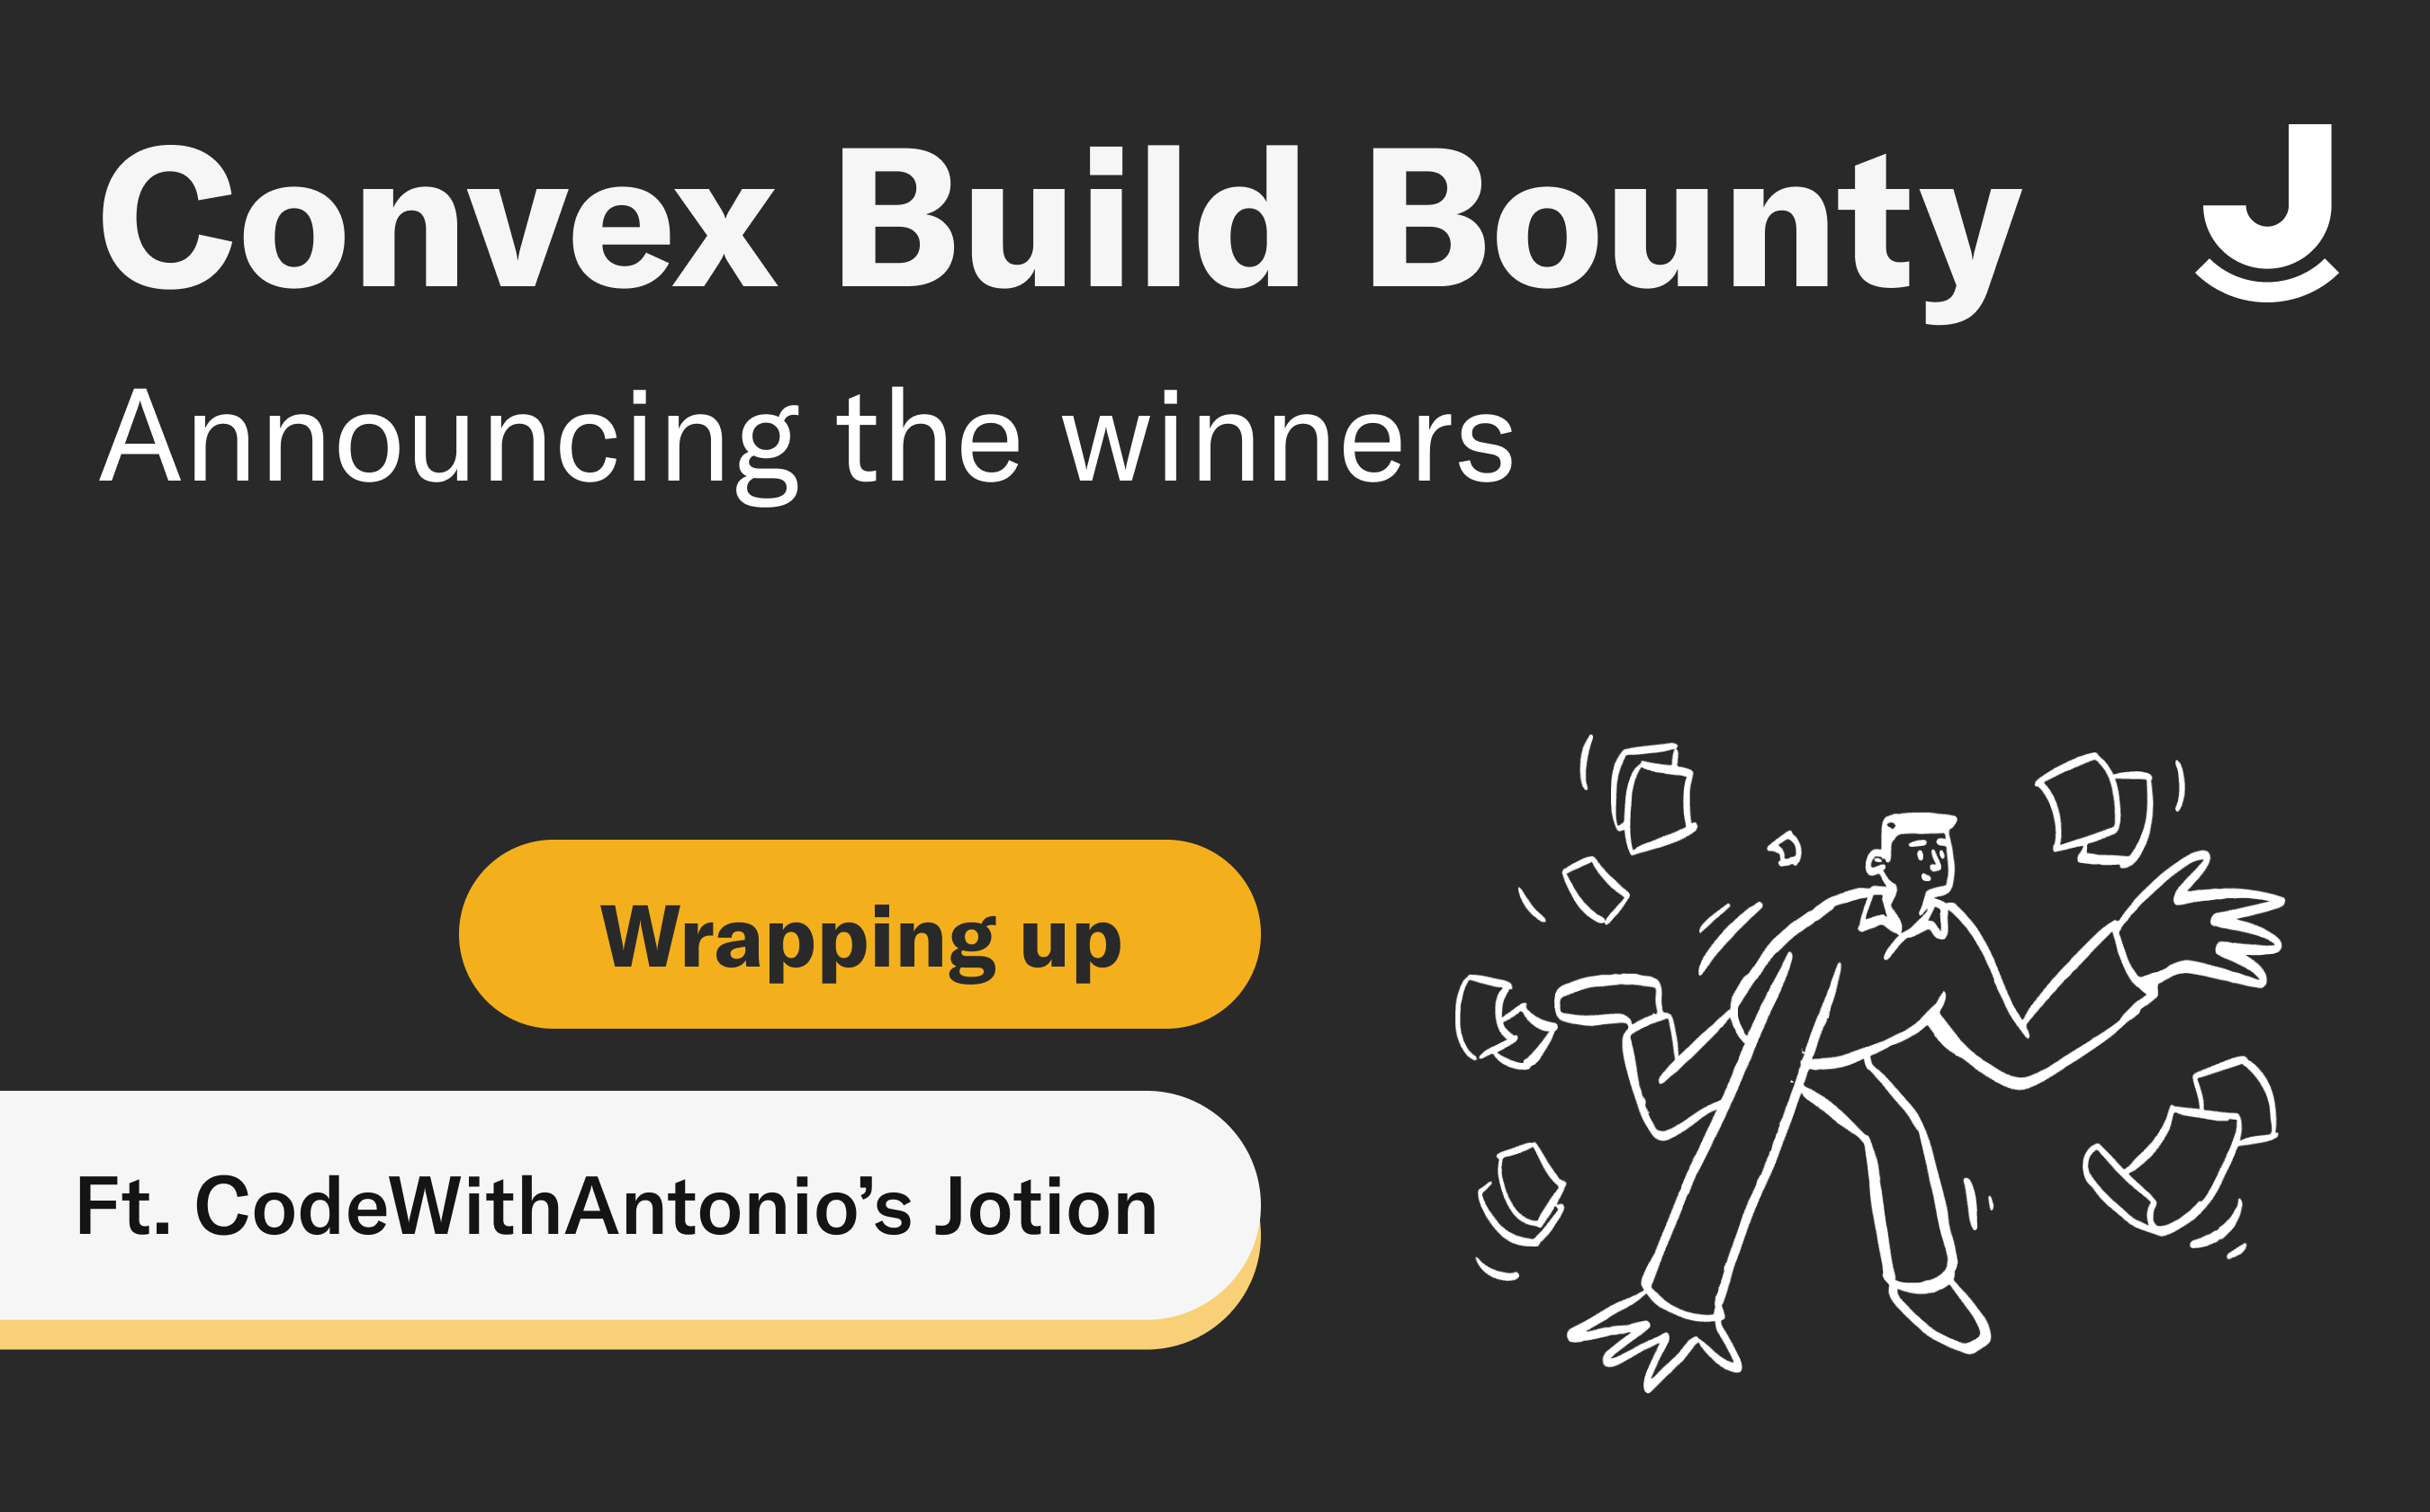 Convex Build Bounty for CodeWithAntonio's Jotion: Announcing the Winners